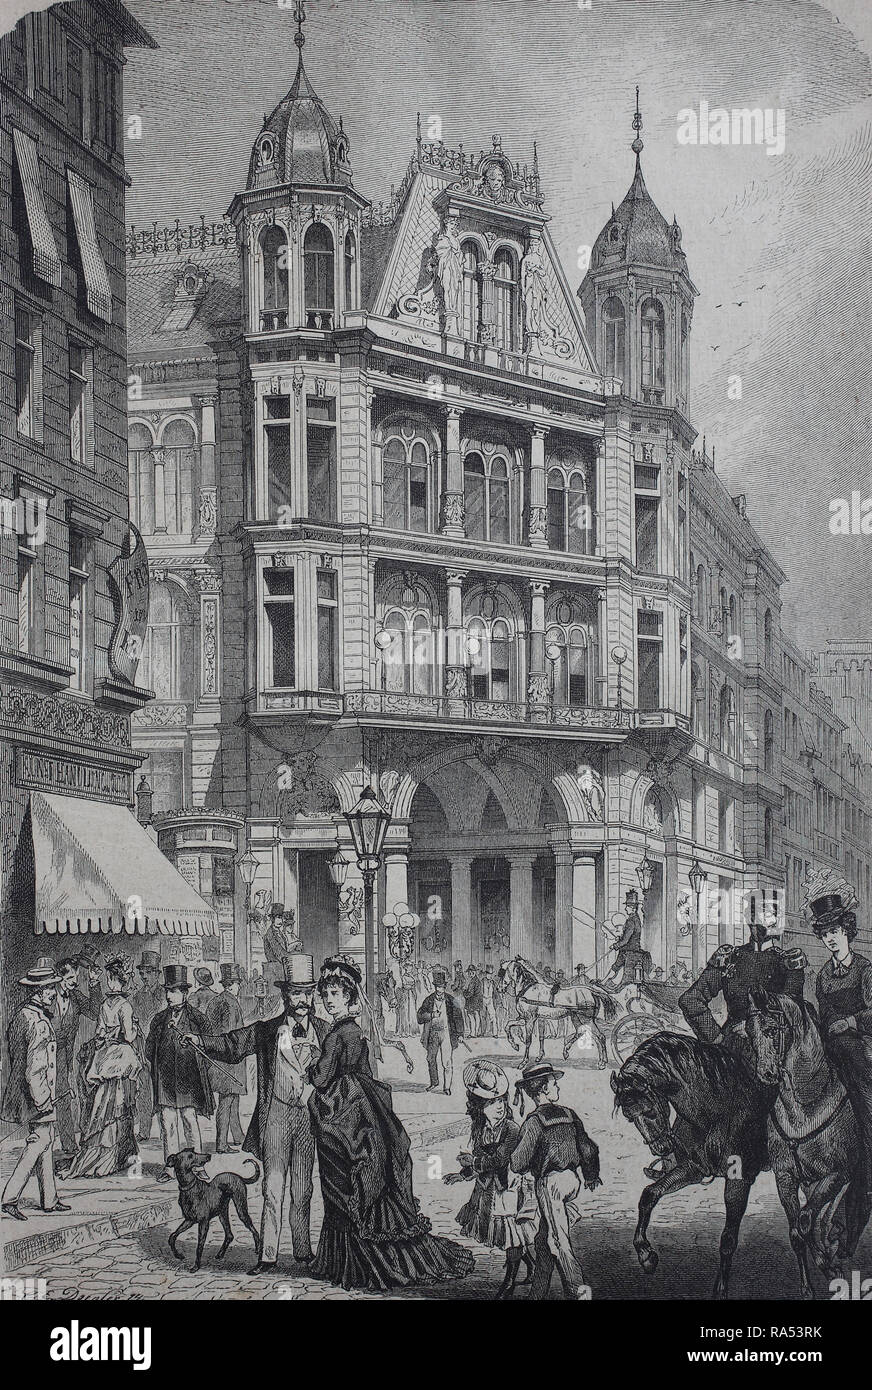 Digital improved reproduction, The corner between the streets FriedrichstraÃŸe and BehrenstraÃŸe at Berlin, Germany, Die Passage an der Ecke der FriedrichstraÃŸe und BehrenstraÃŸe in Berlin, Deutschland, from an original print from the year 1865, 19th century, Stock Photo